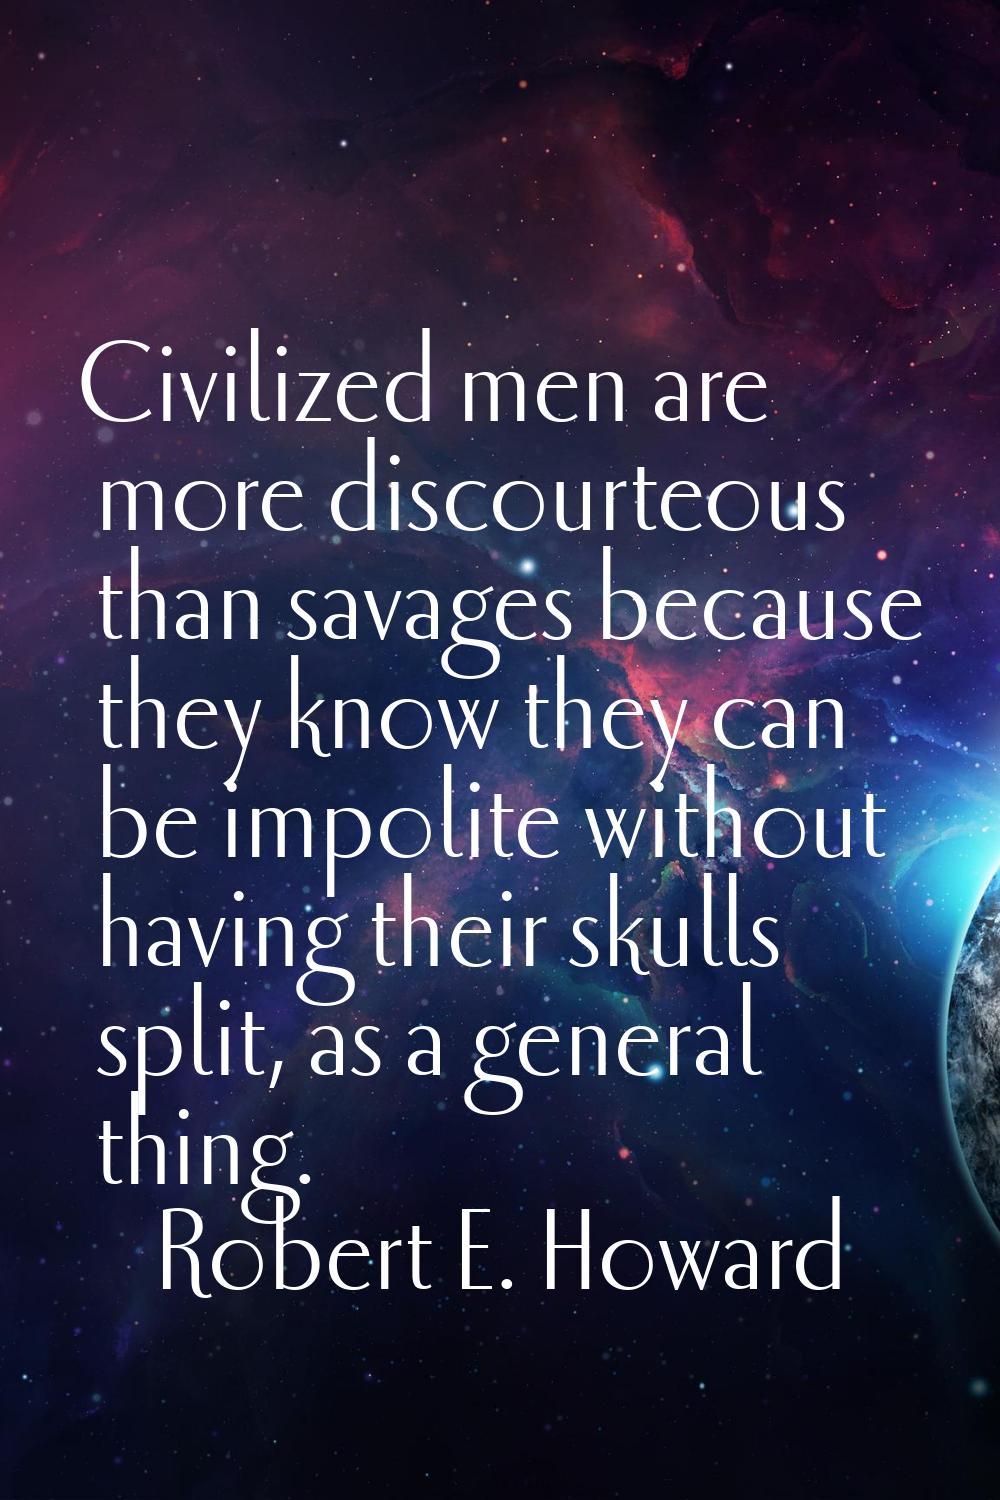 Civilized men are more discourteous than savages because they know they can be impolite without hav